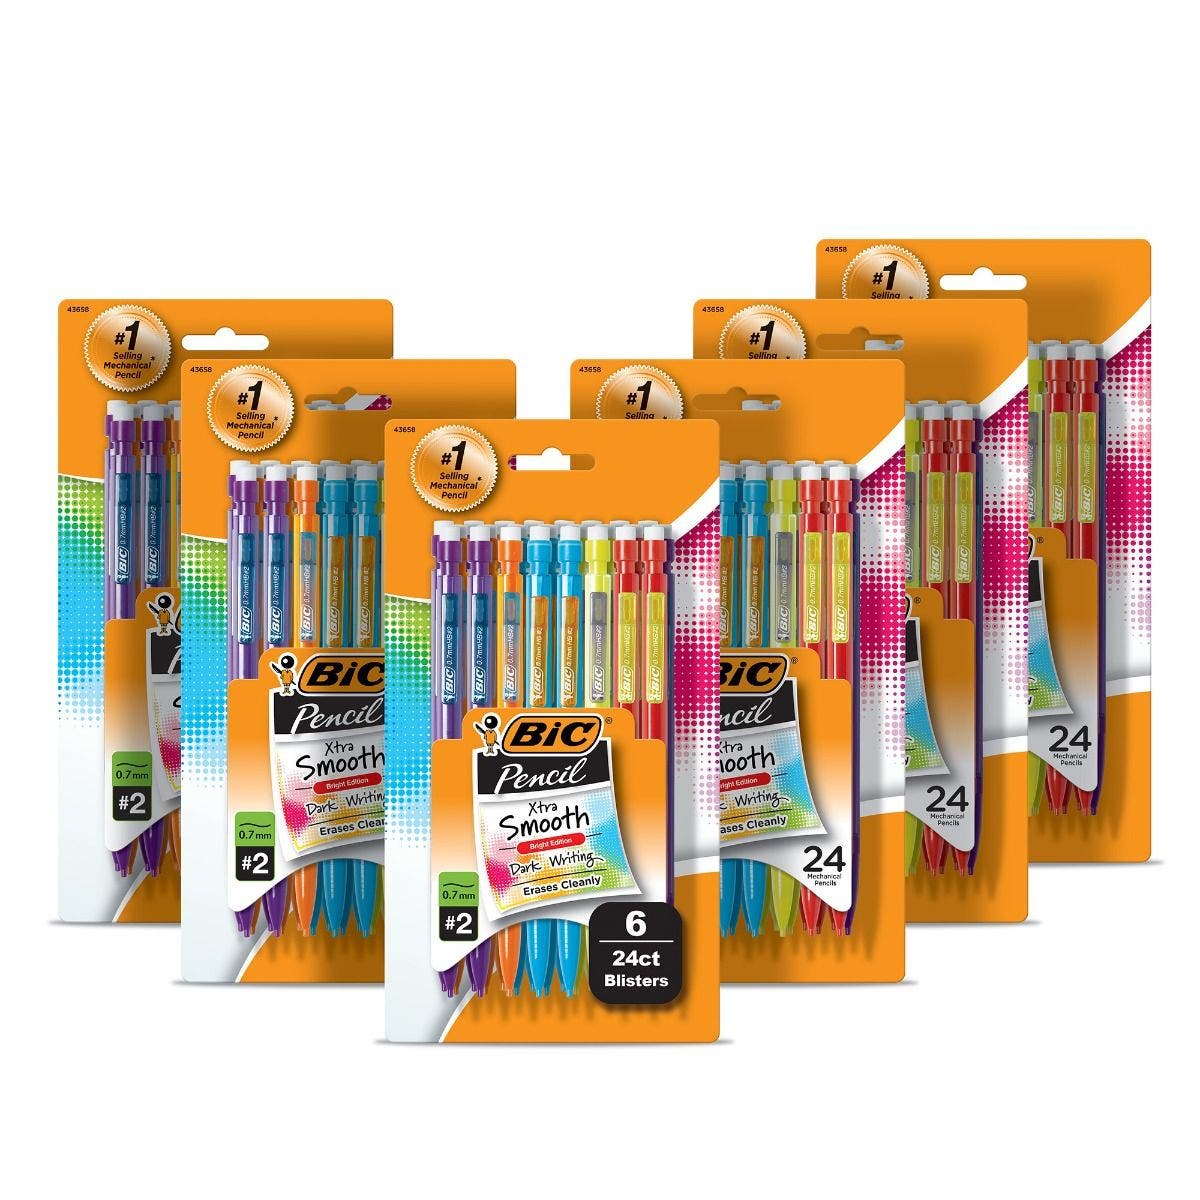 BIC Xtra-Smooth Mechanical Pencils, 0.7mm Point, 10-Count Pack, Mechanical  Pencils for School